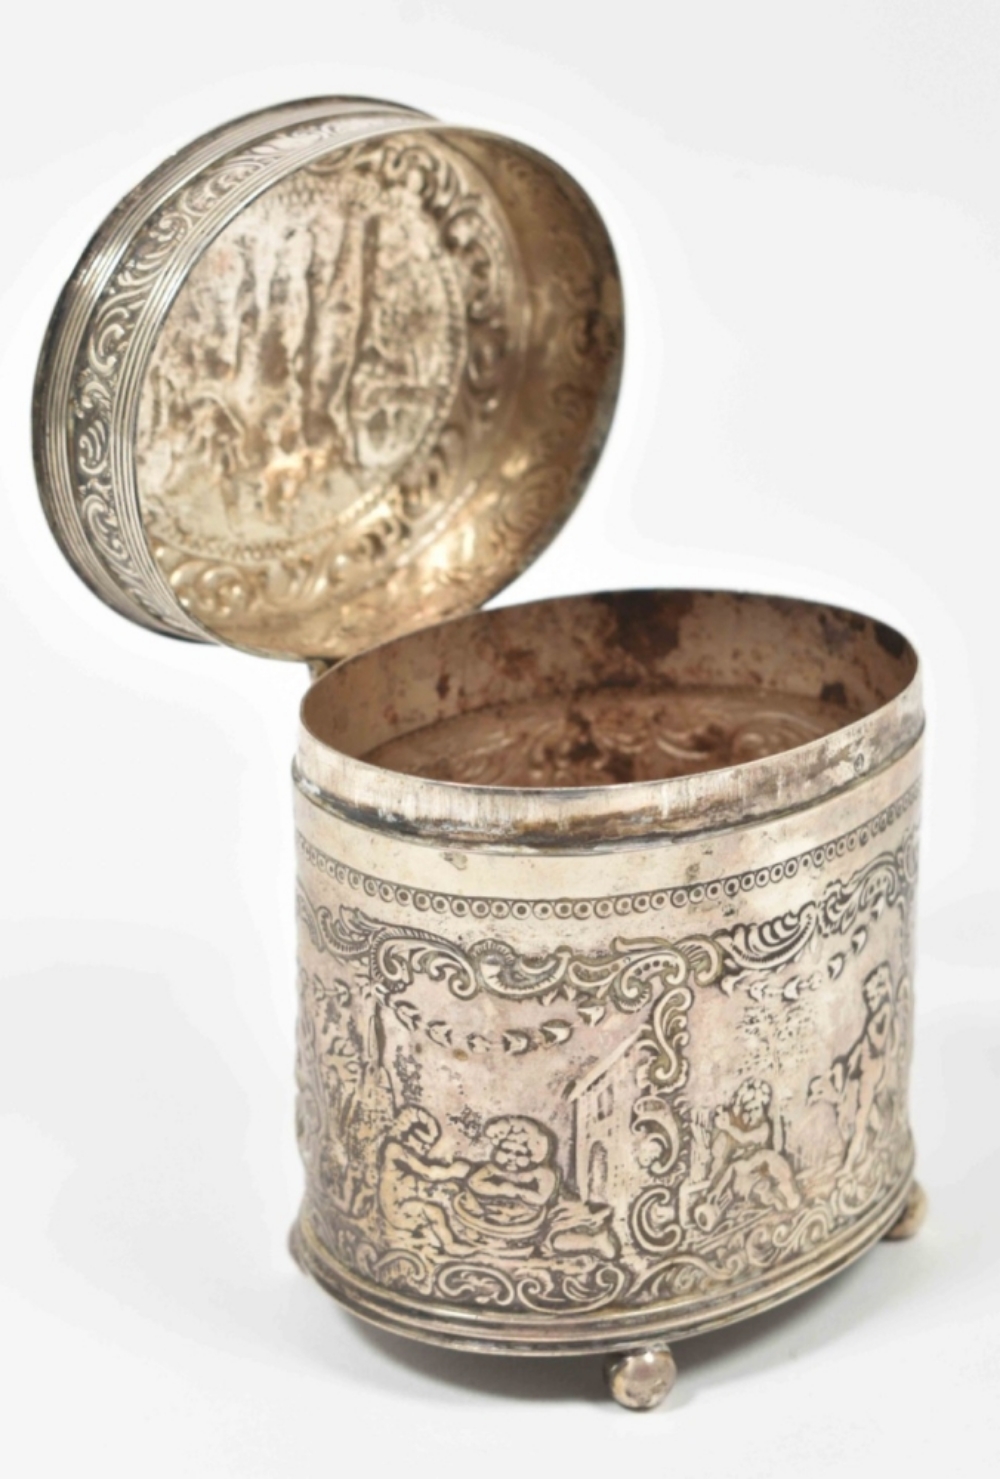 Oval silver tea-caddy - Image 7 of 7